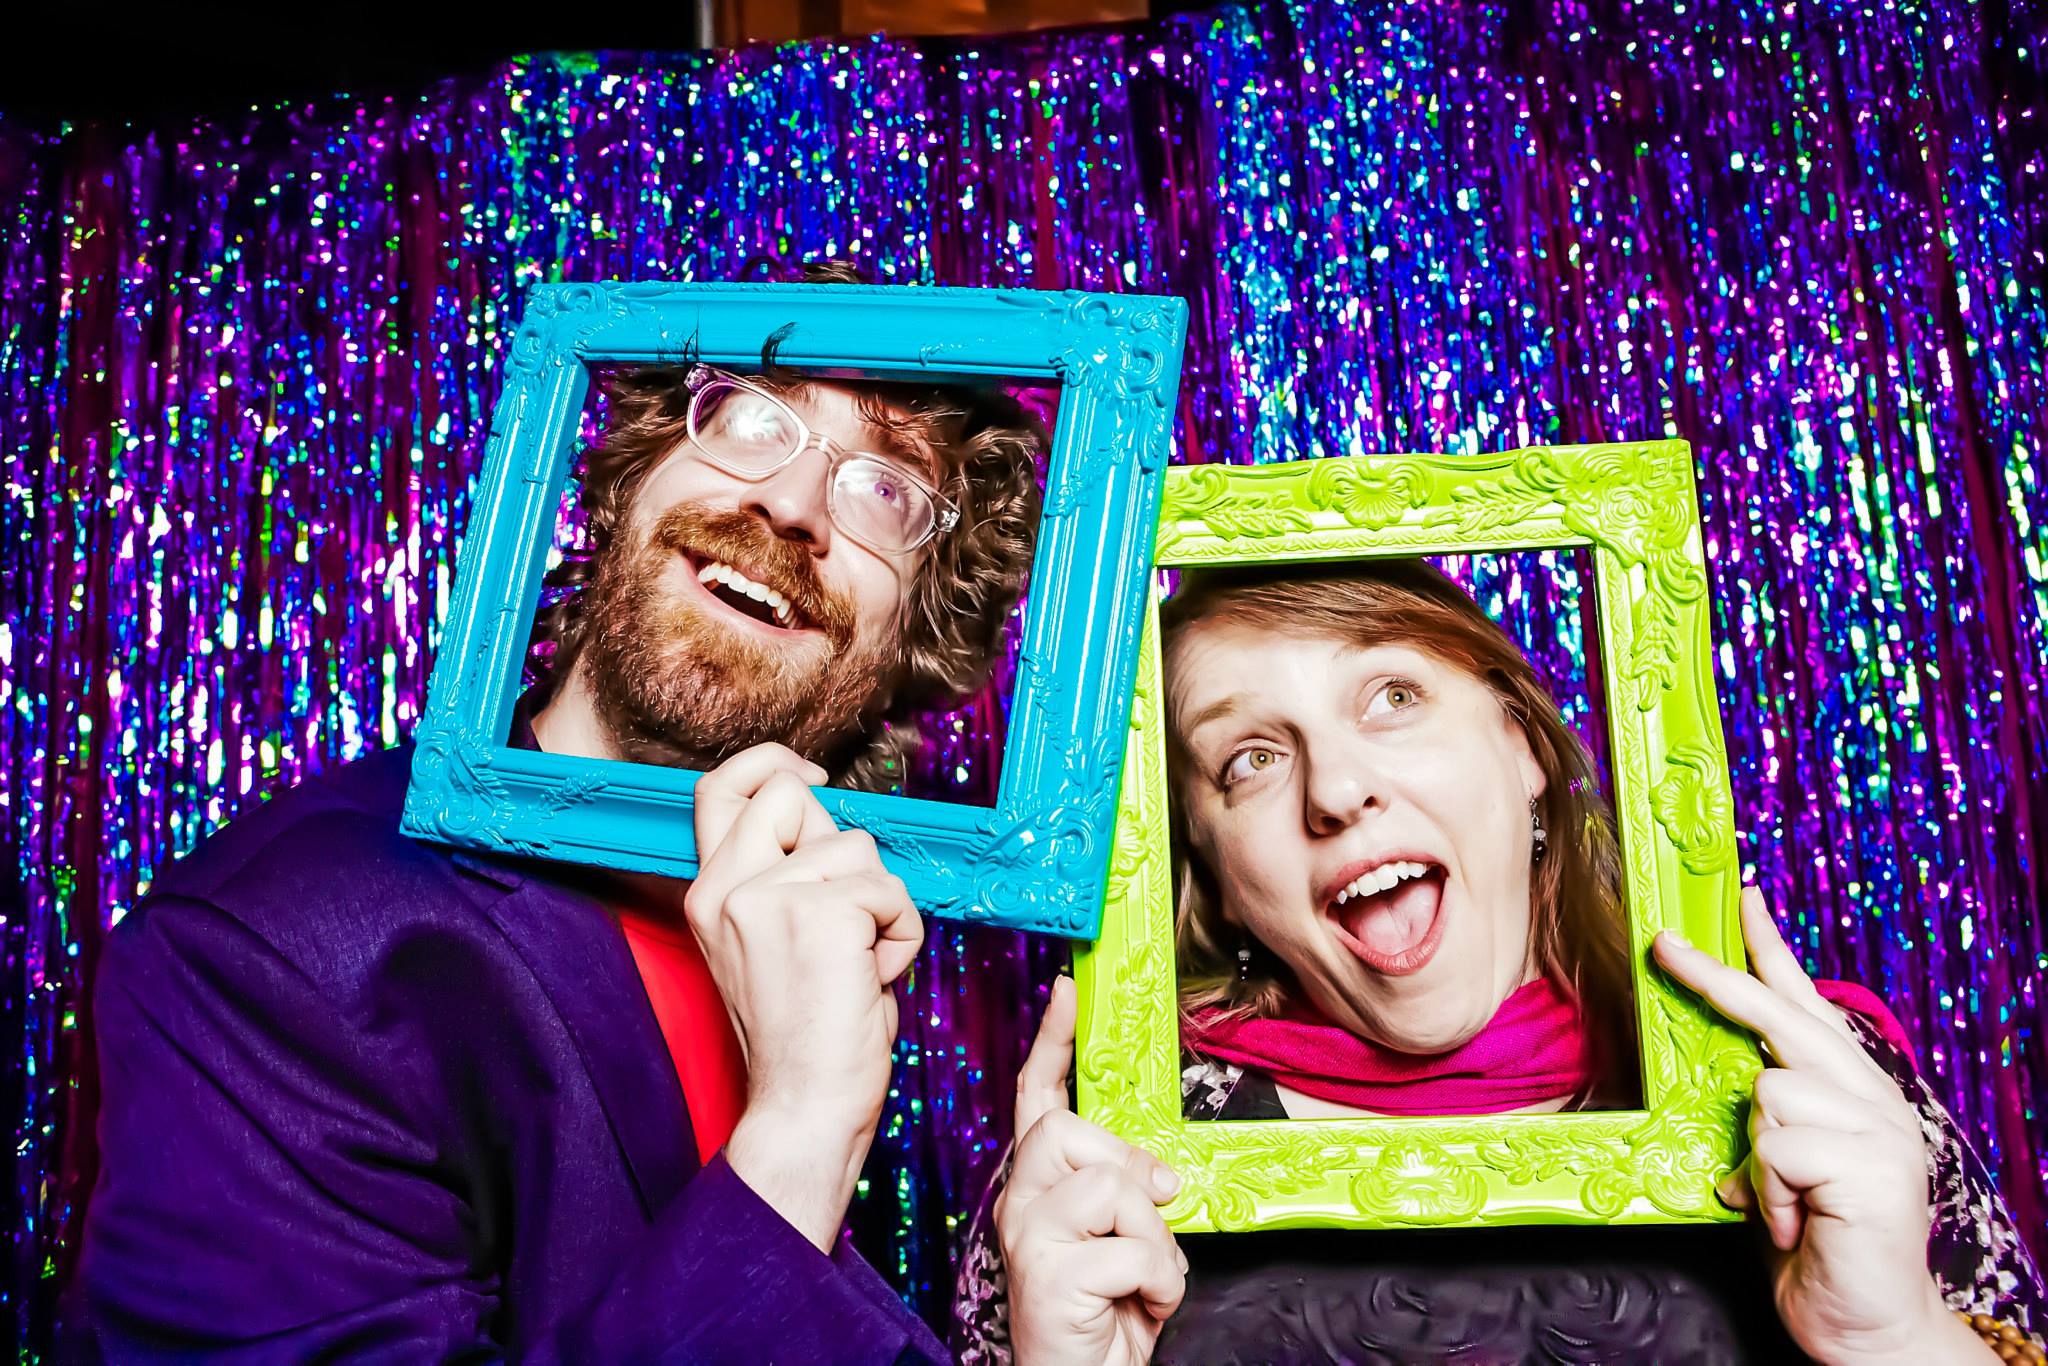 Christopher Schmitt and Ari Stiles standing next to each other in front of a glitter background, both with their heads sticking through bright blue and green picture frames, making faces.